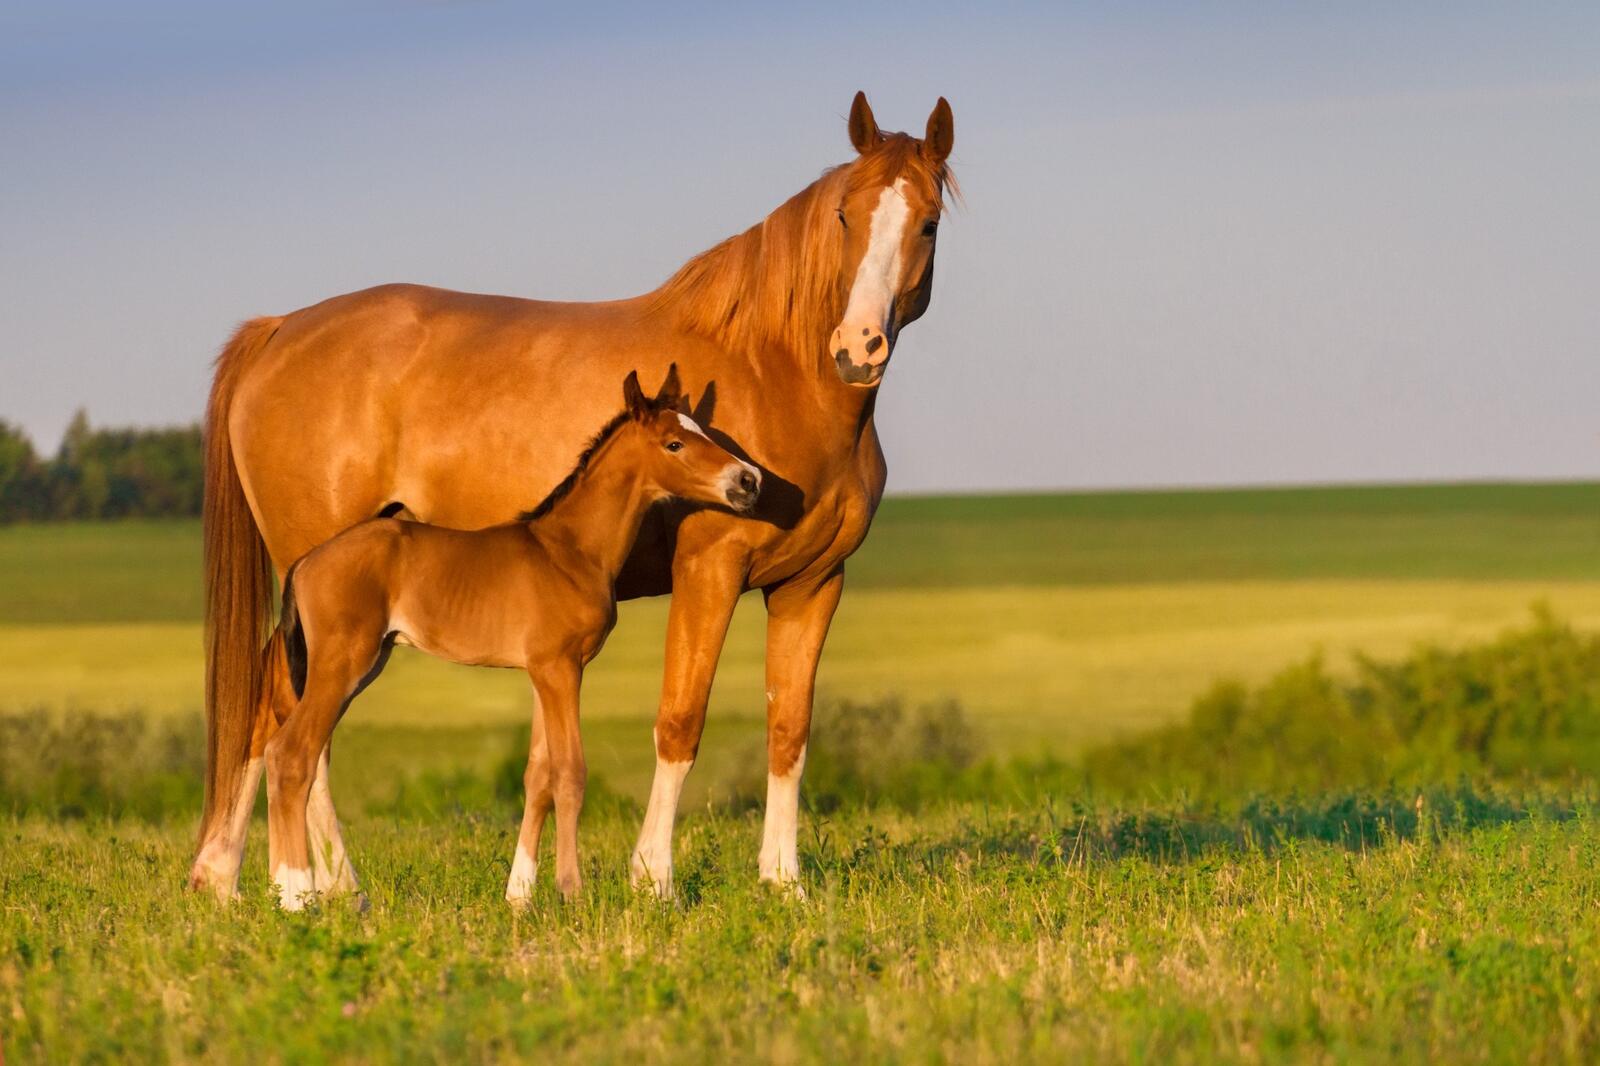 Free photo A horse and foal walking in a field